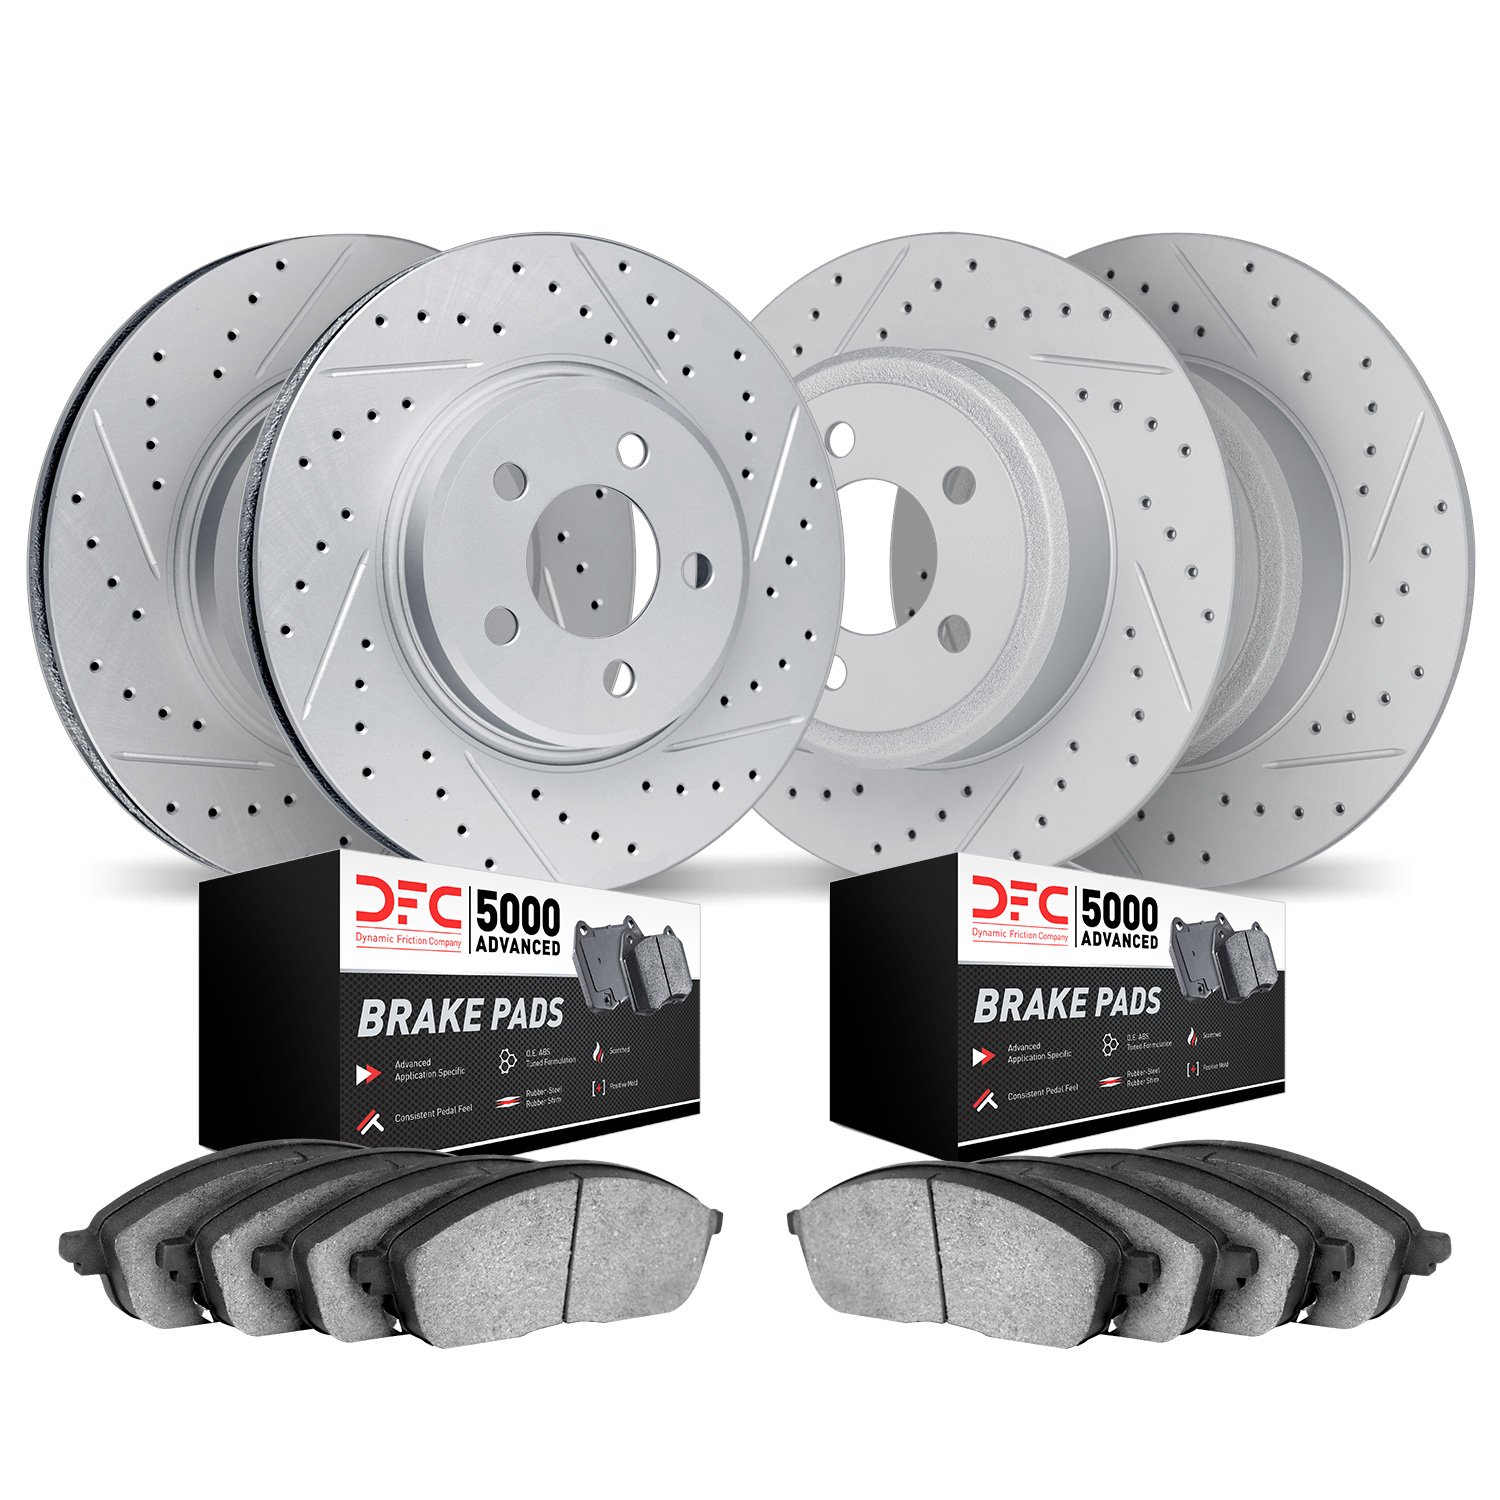 2504-59046 Geoperformance Drilled/Slotted Rotors w/5000 Advanced Brake Pads Kit, 2020-2021 Acura/Honda, Position: Front and Rear